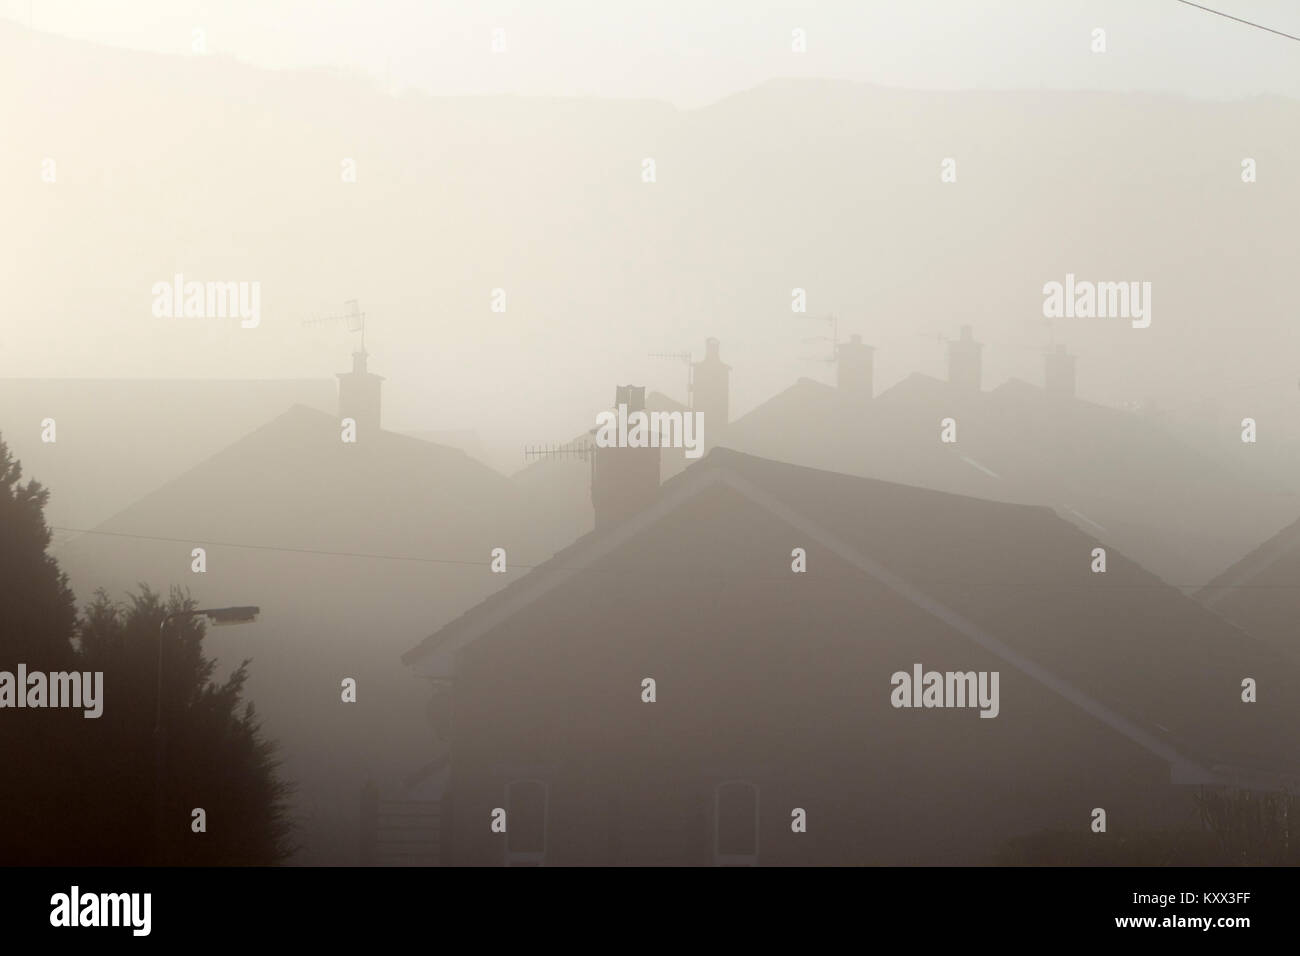 fog over residential homes with chimneys on a foggy day in the uk Stock Photo